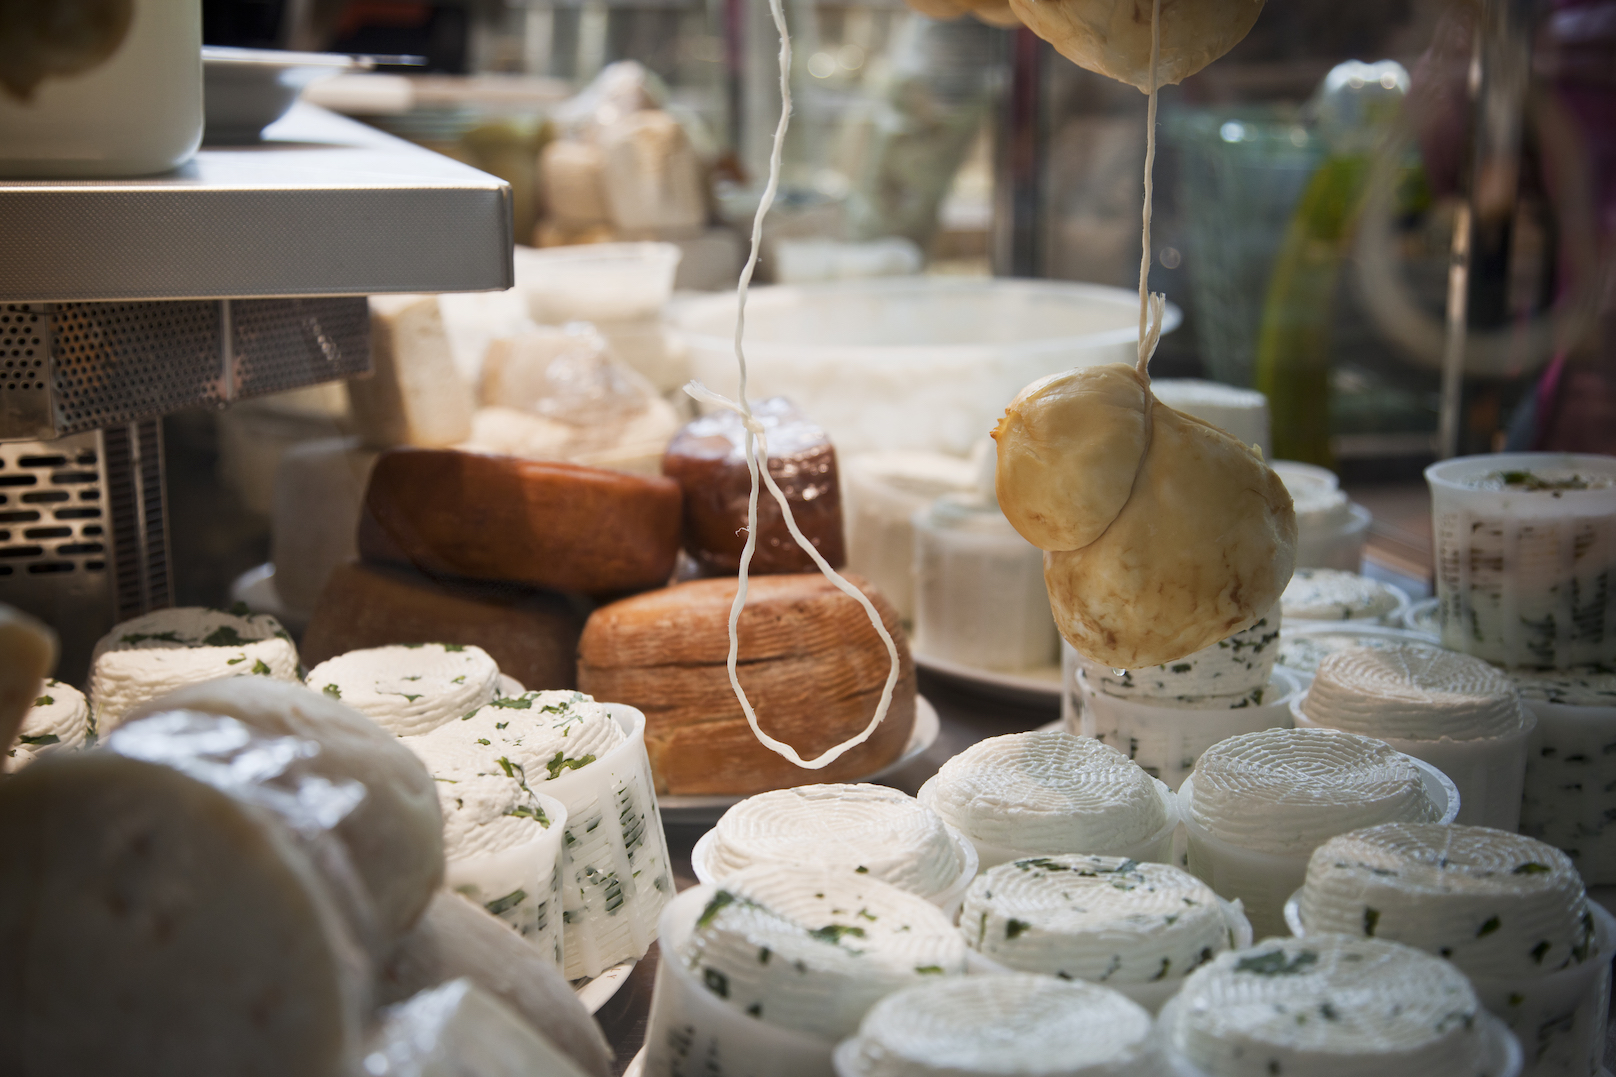 Raw milk cheese: what does this mean?